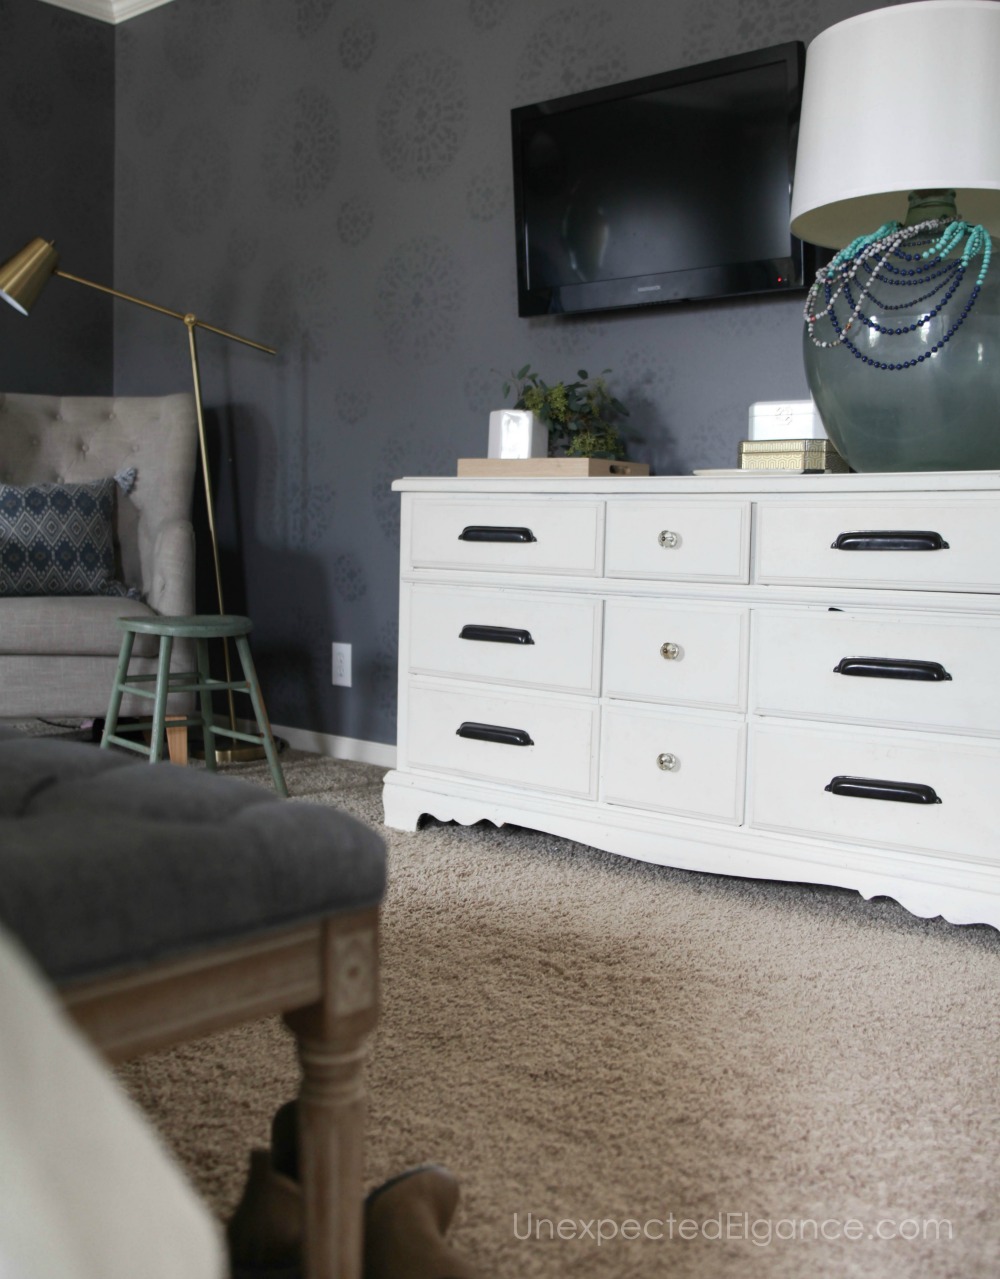 Check out this master bedroom refresh! By using things you already have and cleaning out the clutter, you can have a new space without spending any money!